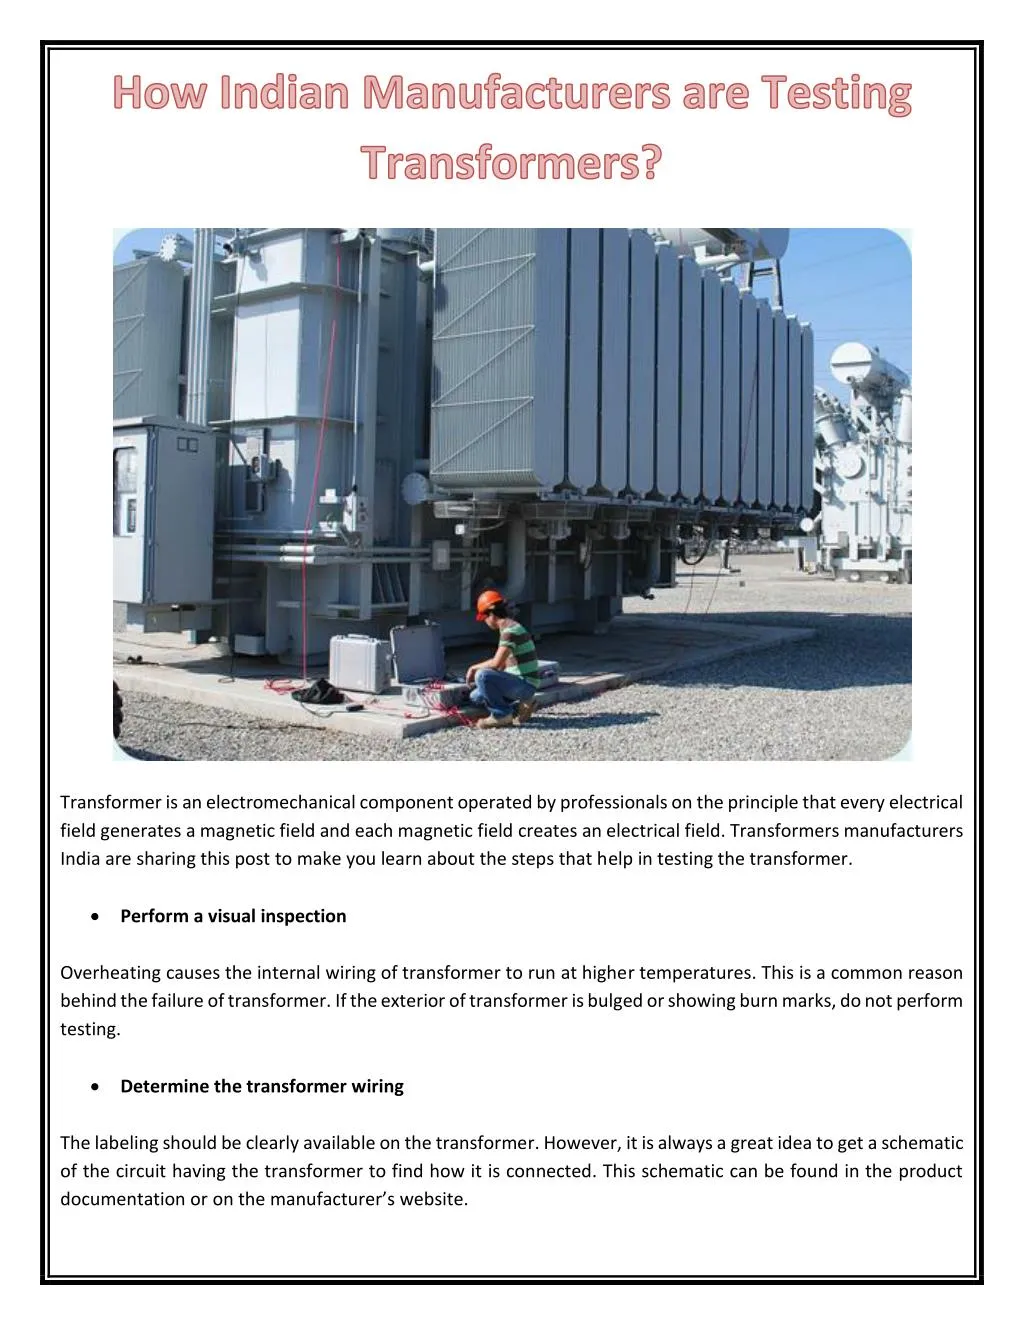 transformer is an electromechanical component